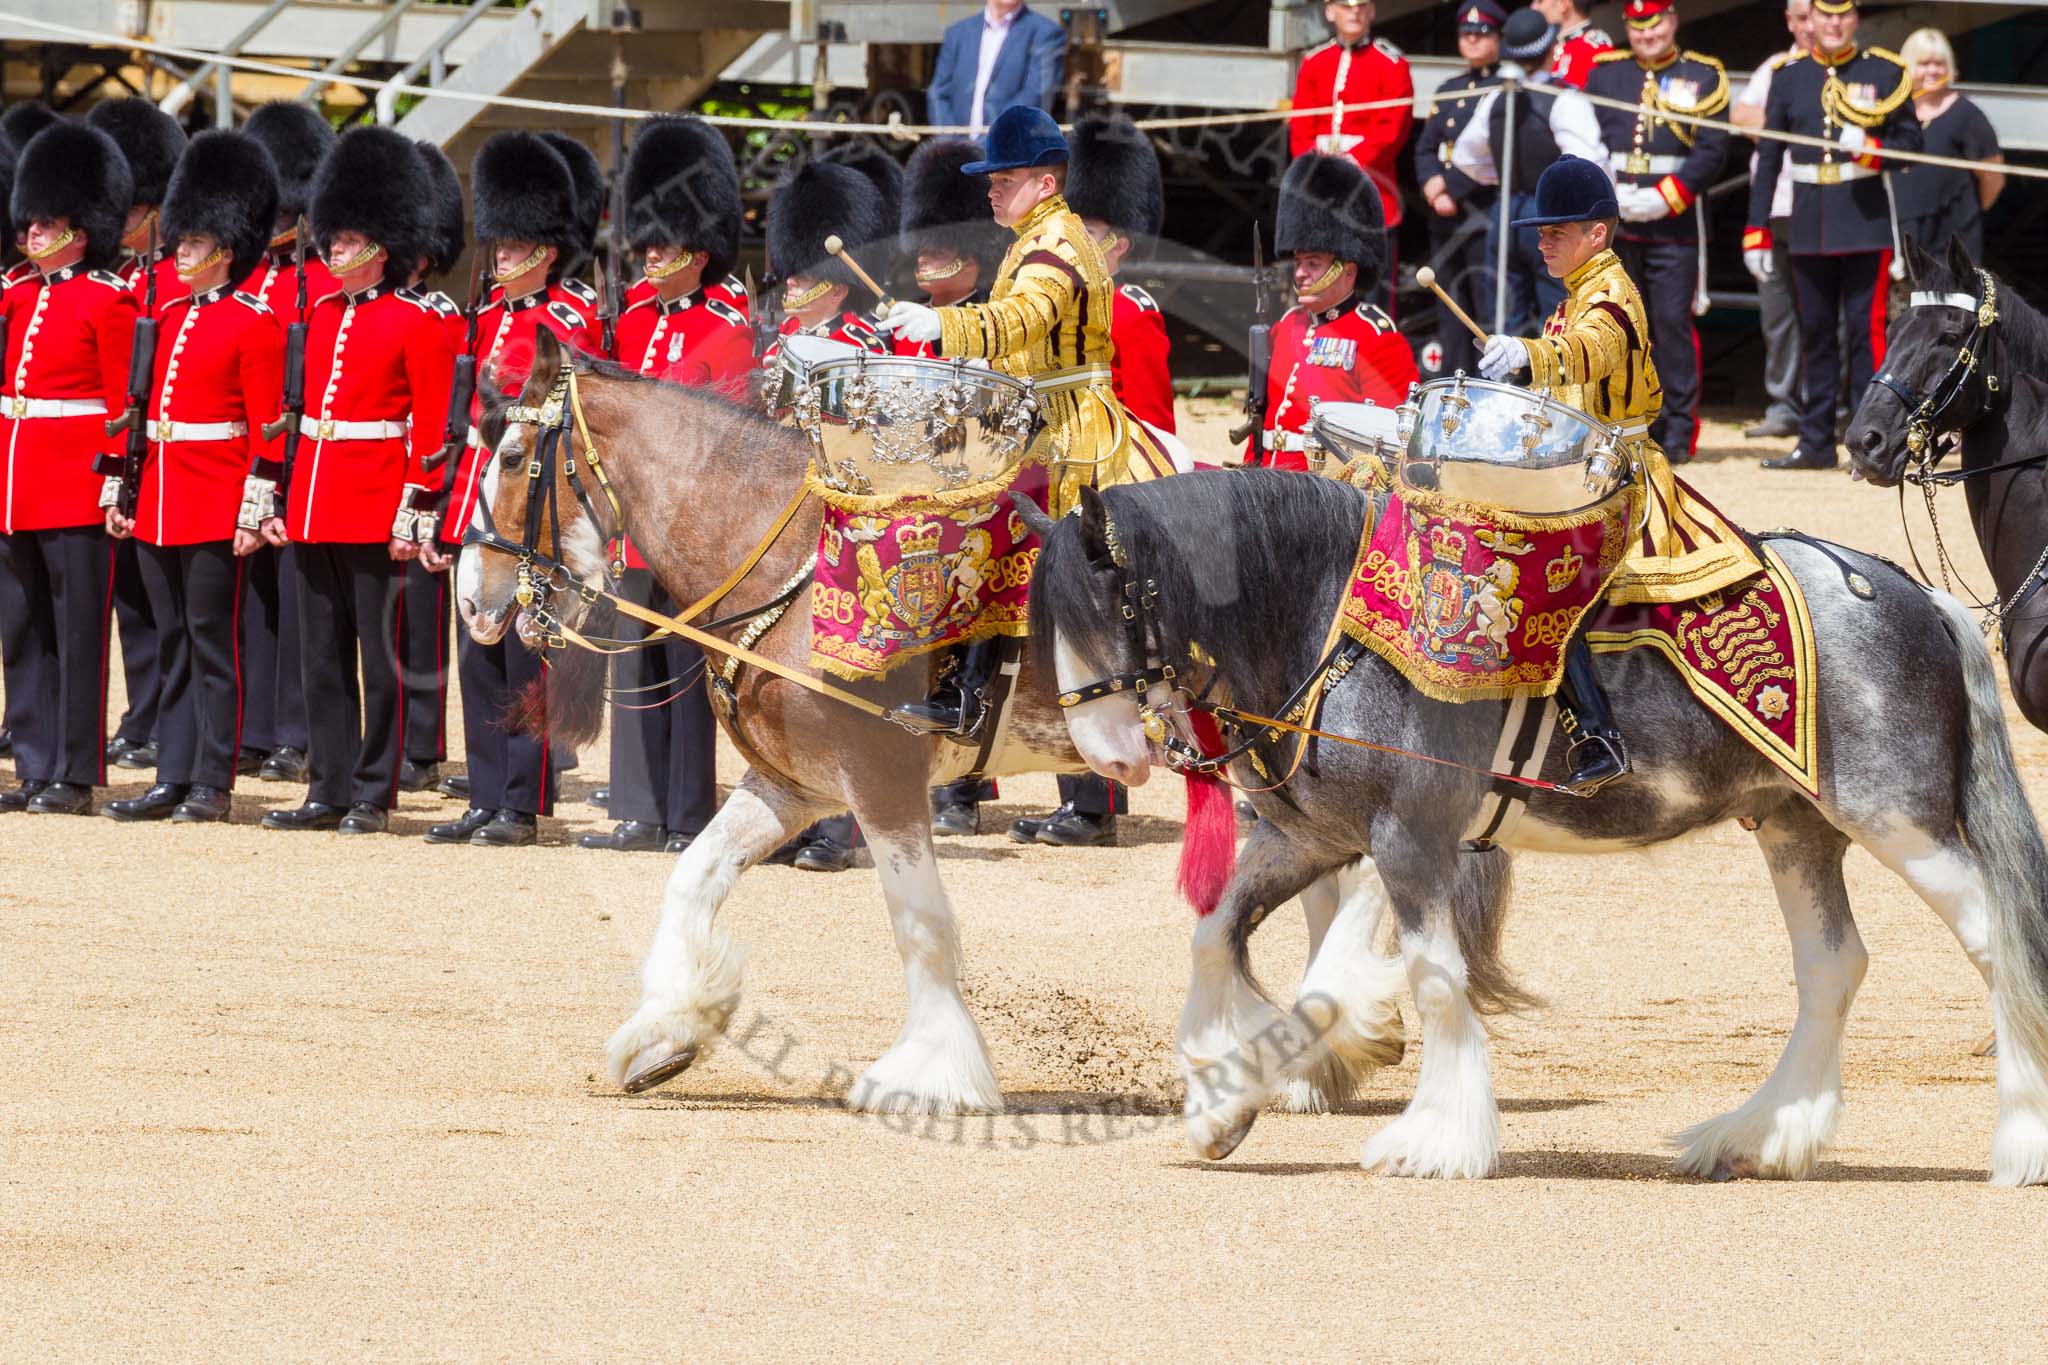 The Colonel's Review 2015.
Horse Guards Parade, Westminster,
London,

United Kingdom,
on 06 June 2015 at 11:50, image #463